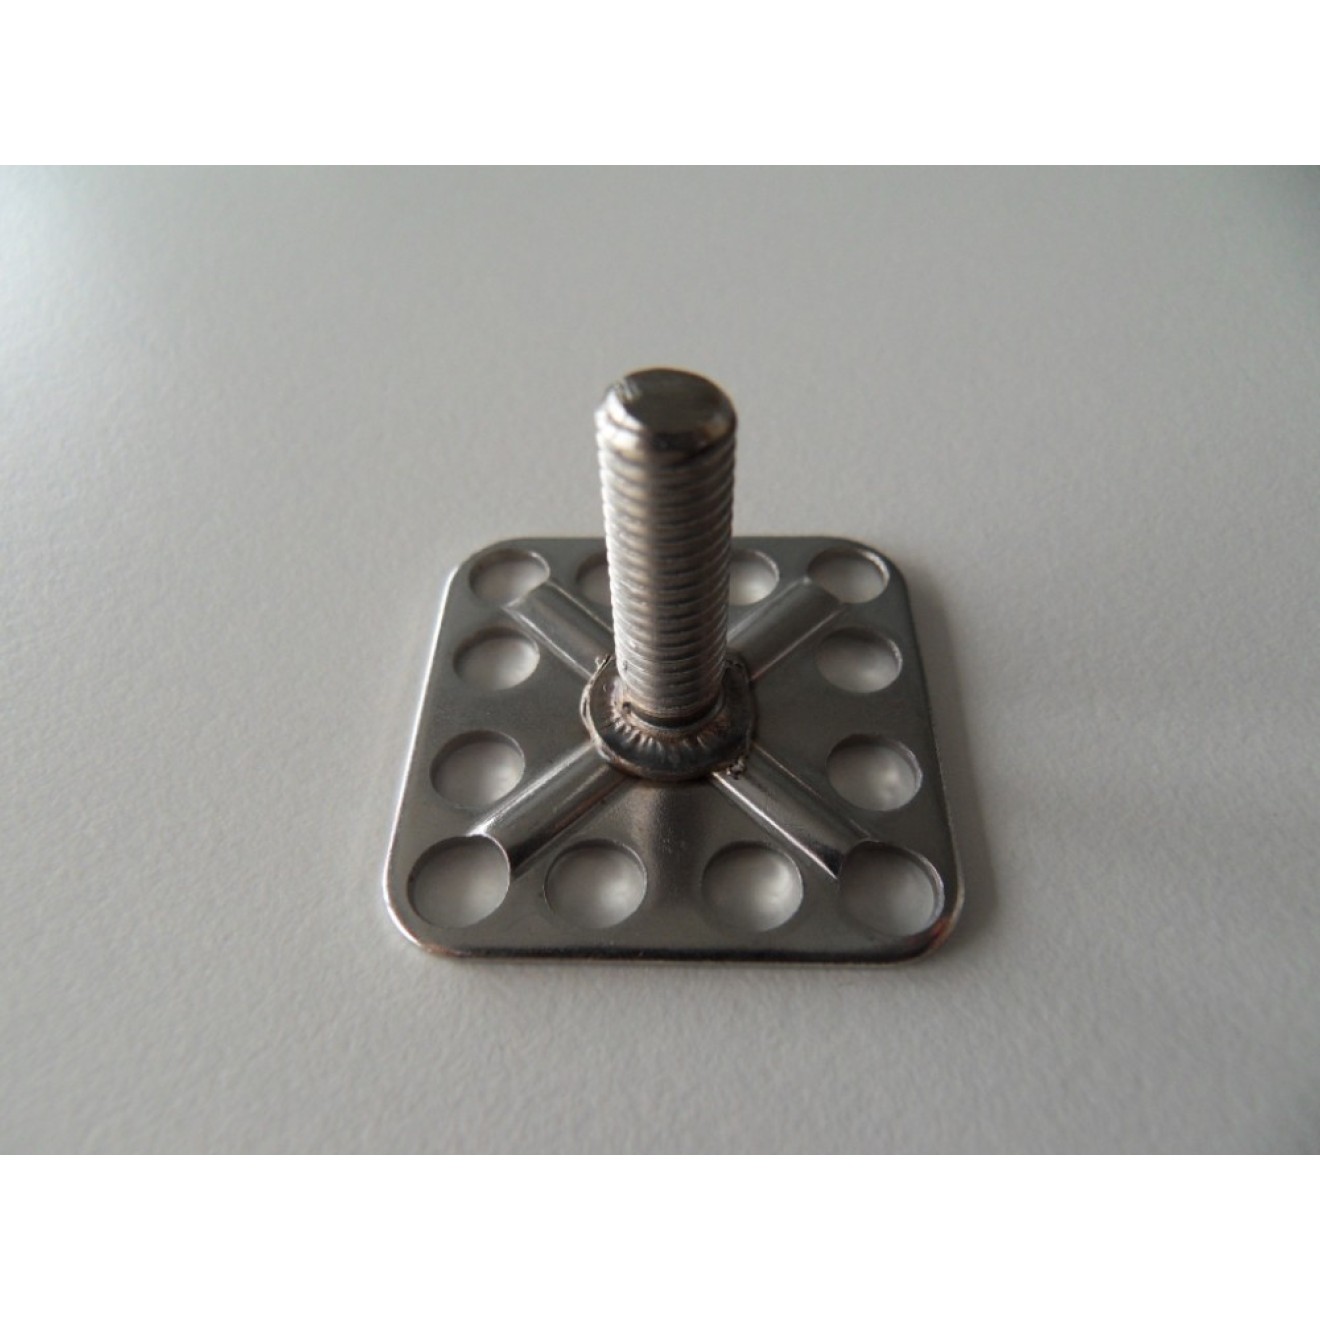 Stainless steel fasteners, male threaded stud M6x20, base plate 30x30mm